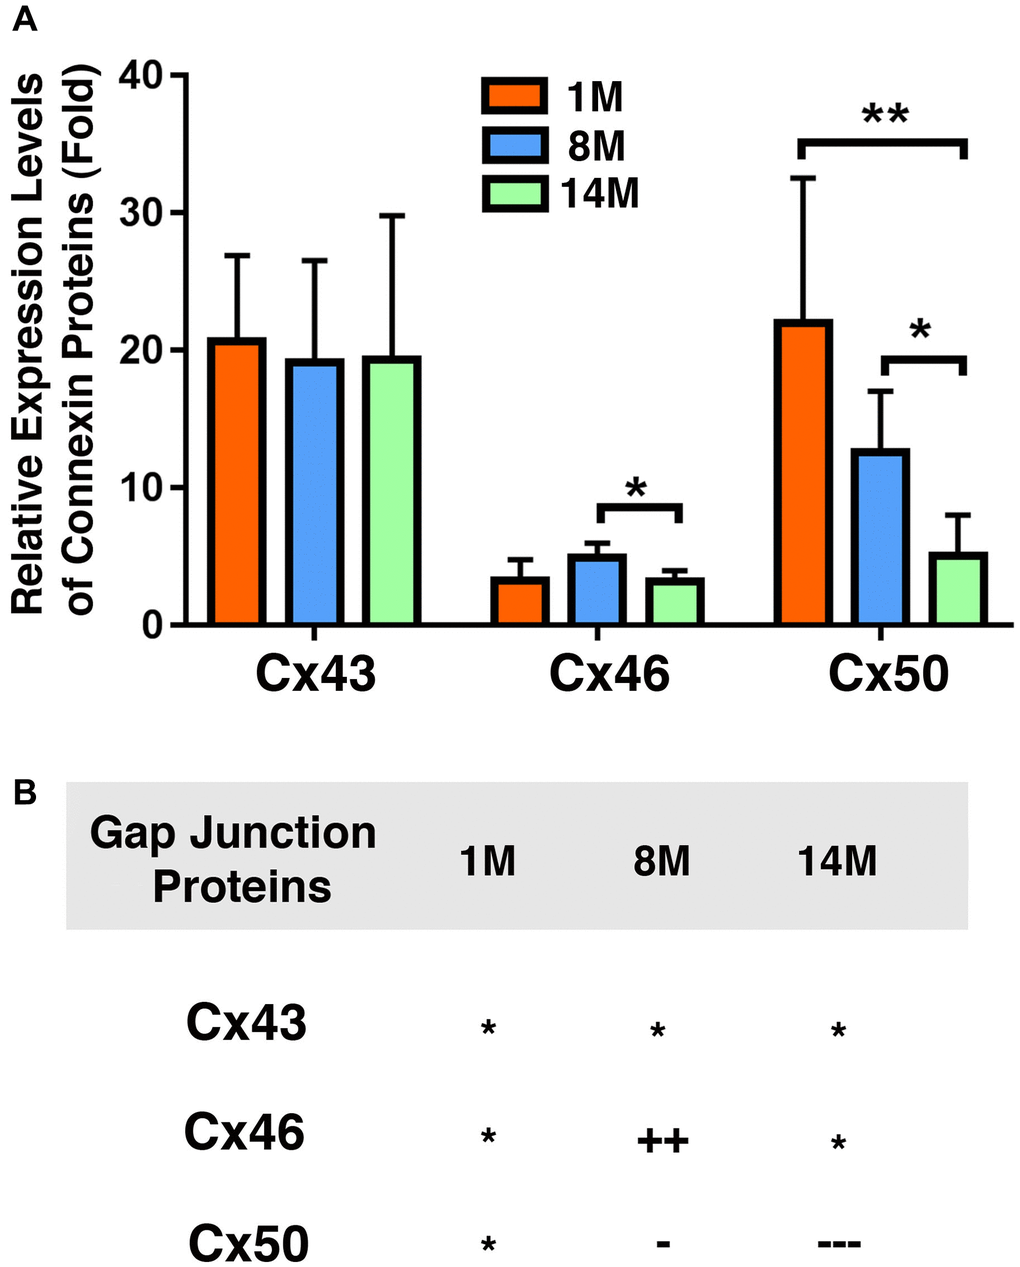 Comparison of expression levels of the connexins Cx43, Cx46 and Cx50 in mouse lens epithelial samples of different age groups. (A) Relative expression levels of Cx43, Cx46 and Cx50 in mouse lens epithelial samples of different age groups (1M, 8M and 14M). Each bar represents an average of five or more lens epithelial samples from five or more mice. (B) Summary of age-dependent changes of the connexins Cx43, Cx46 and Cx50 in mouse lenses of different age groups. The levels of the connexins Cx43, Cx46 or Cx50 from 1M old mice are used as references indicated by the star symbol ‘*’. +, ++, and +++ represent increases in protein levels between 0.1% and 24.99%, 25% and 50%, and >50%, respectively; −, −−, and −−− stands for decreases in protein levels between 0.1% and 24.99%, 25% and 50%, and >50%, respectively.